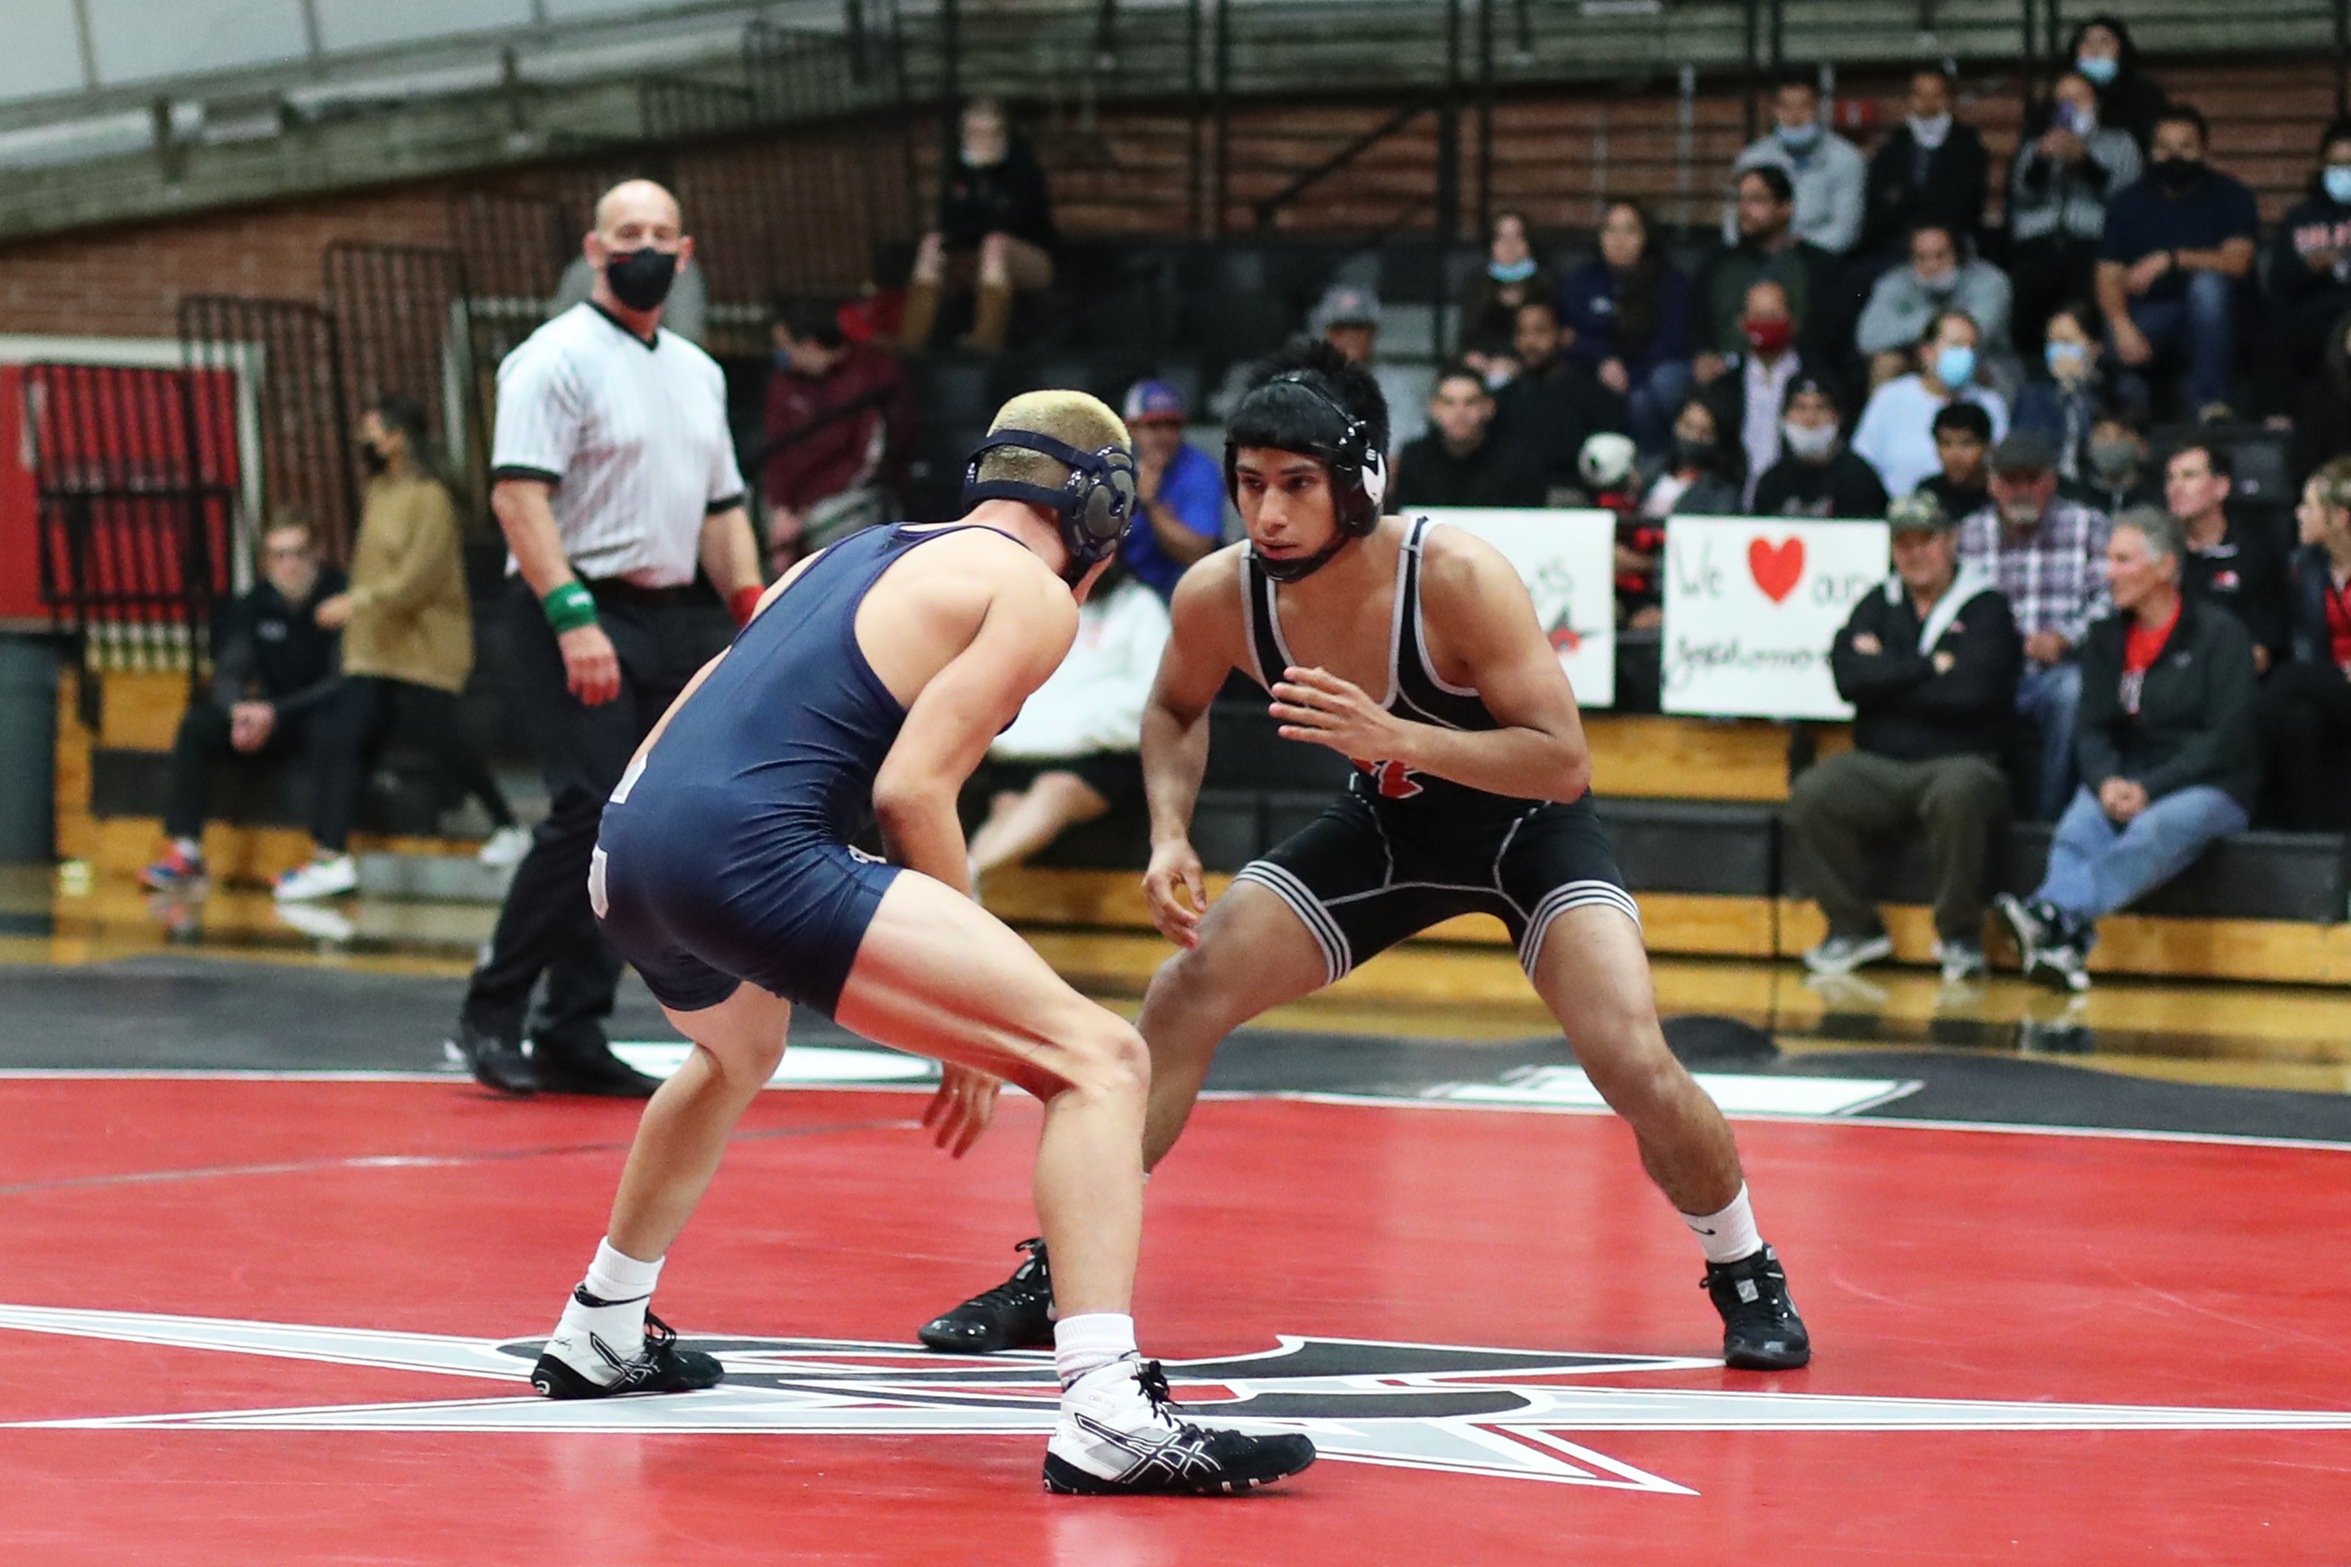 Juan Diaz wrestles in the 125 lb. weight class. He currently has an honorable mention honor. Photo by Hugh Cox.